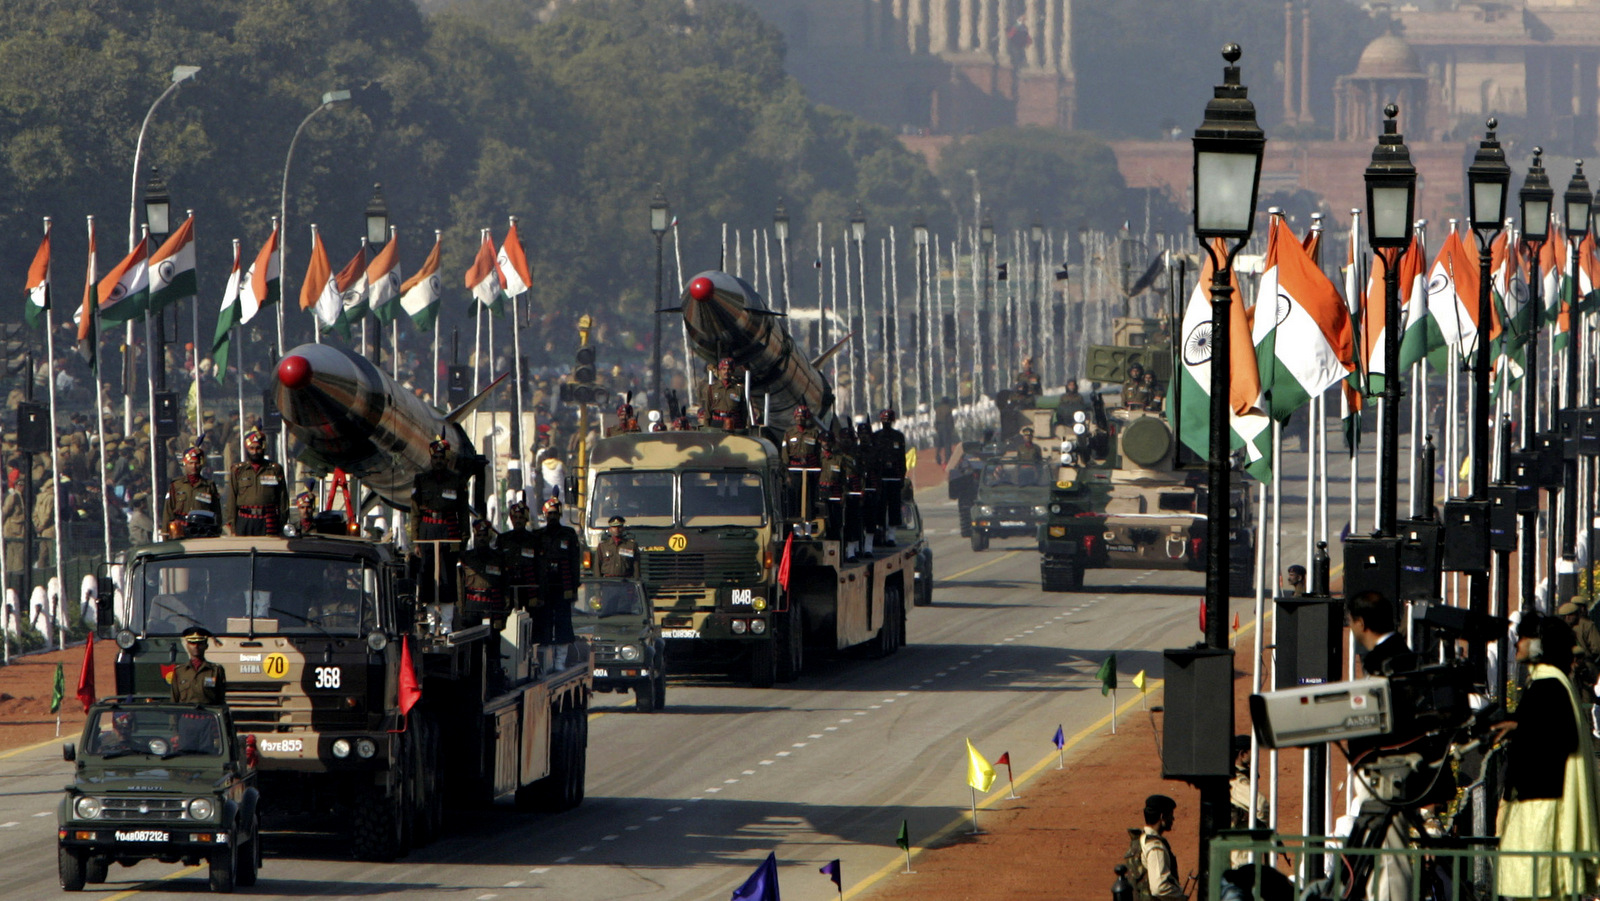 India's nuclear-capable missile Agni-I, left, and Agni-II, right, are displayed during Republic Day rehearsals, in the backdrop of the presidential Palace in New Delhi, India. (AP/Saurabh Das)